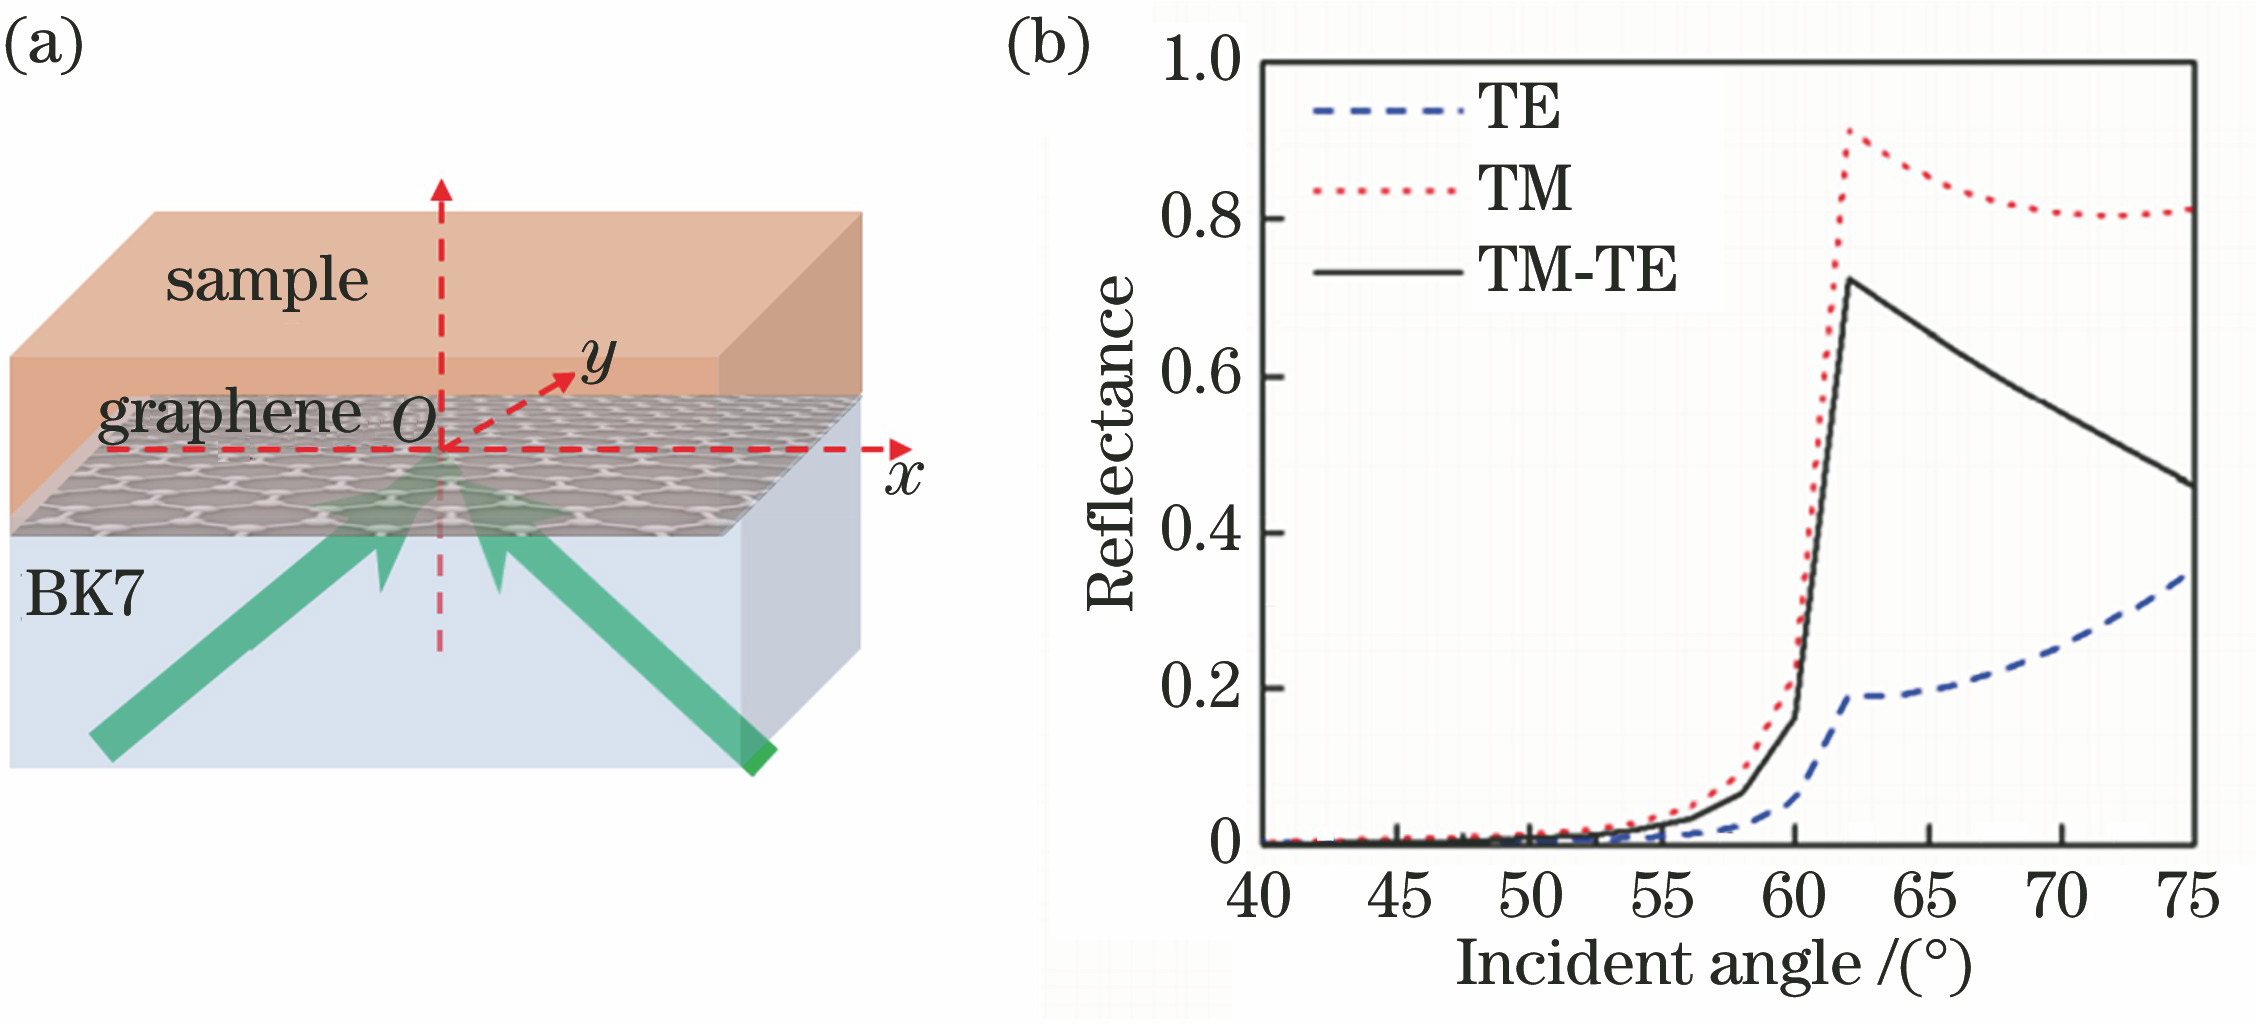 Polarization selective absorption properties of graphene under total internal reflection conditions. (a) Schematic of sandwich structure containing graphene; (b) reflectivity curves of TE polarized light and TM polarized light